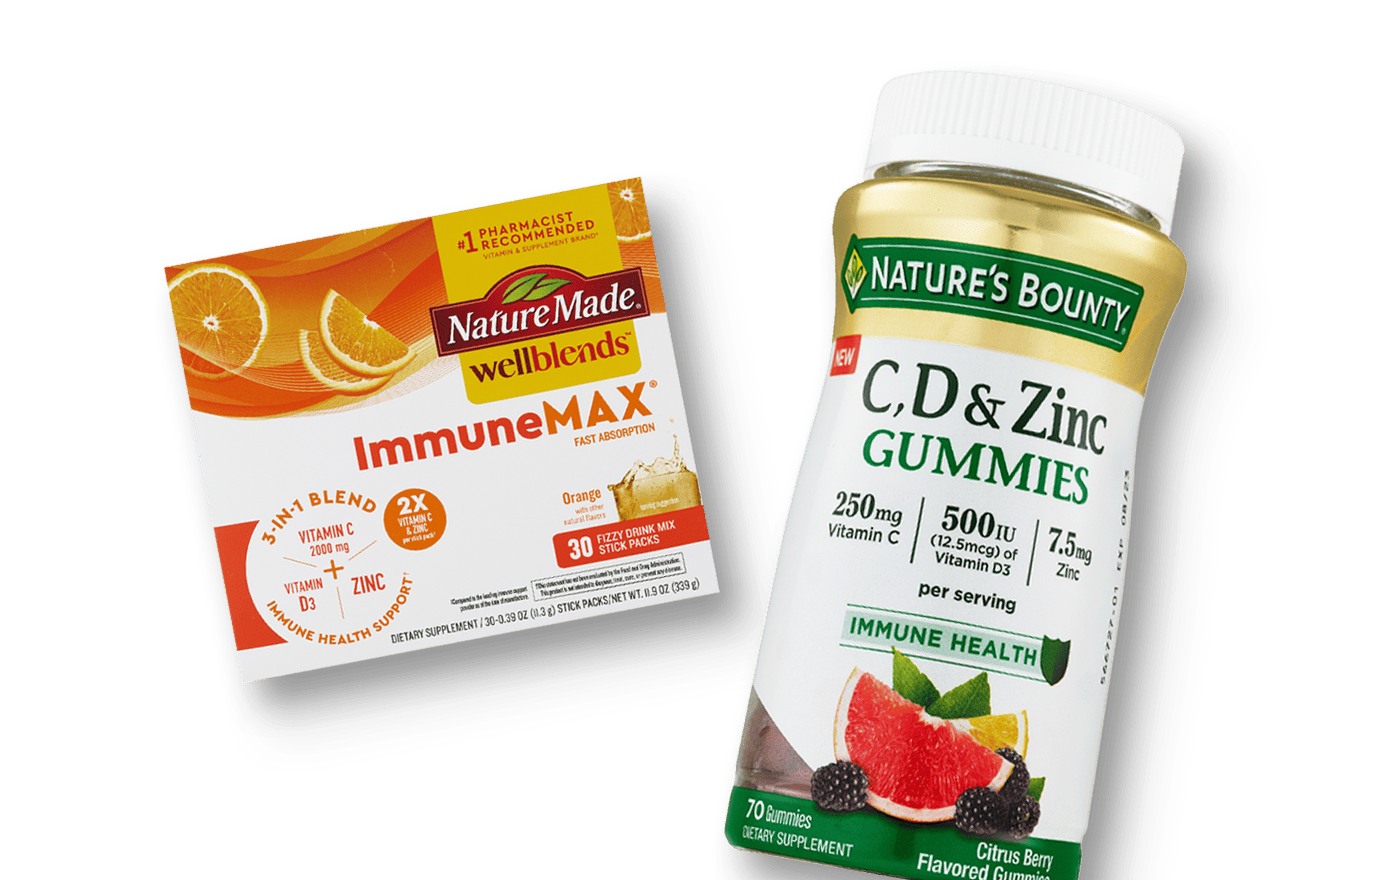 Immunity support supplements, Nature Made and Nature's Bounty examples